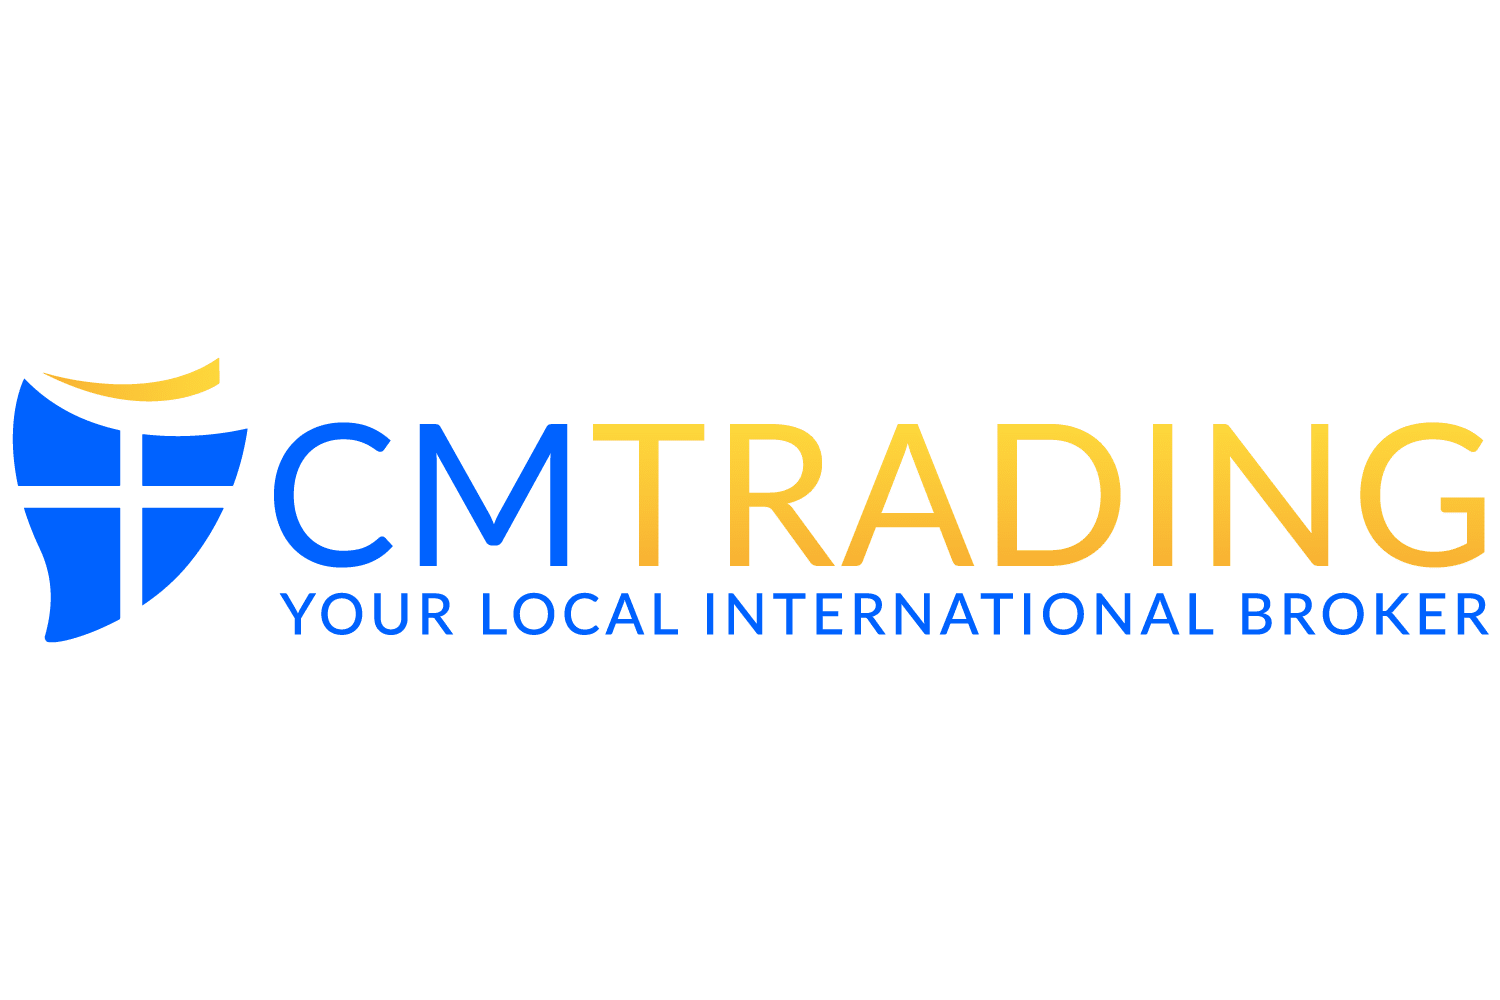 CM Trading review - Should this FX broker be trusted?